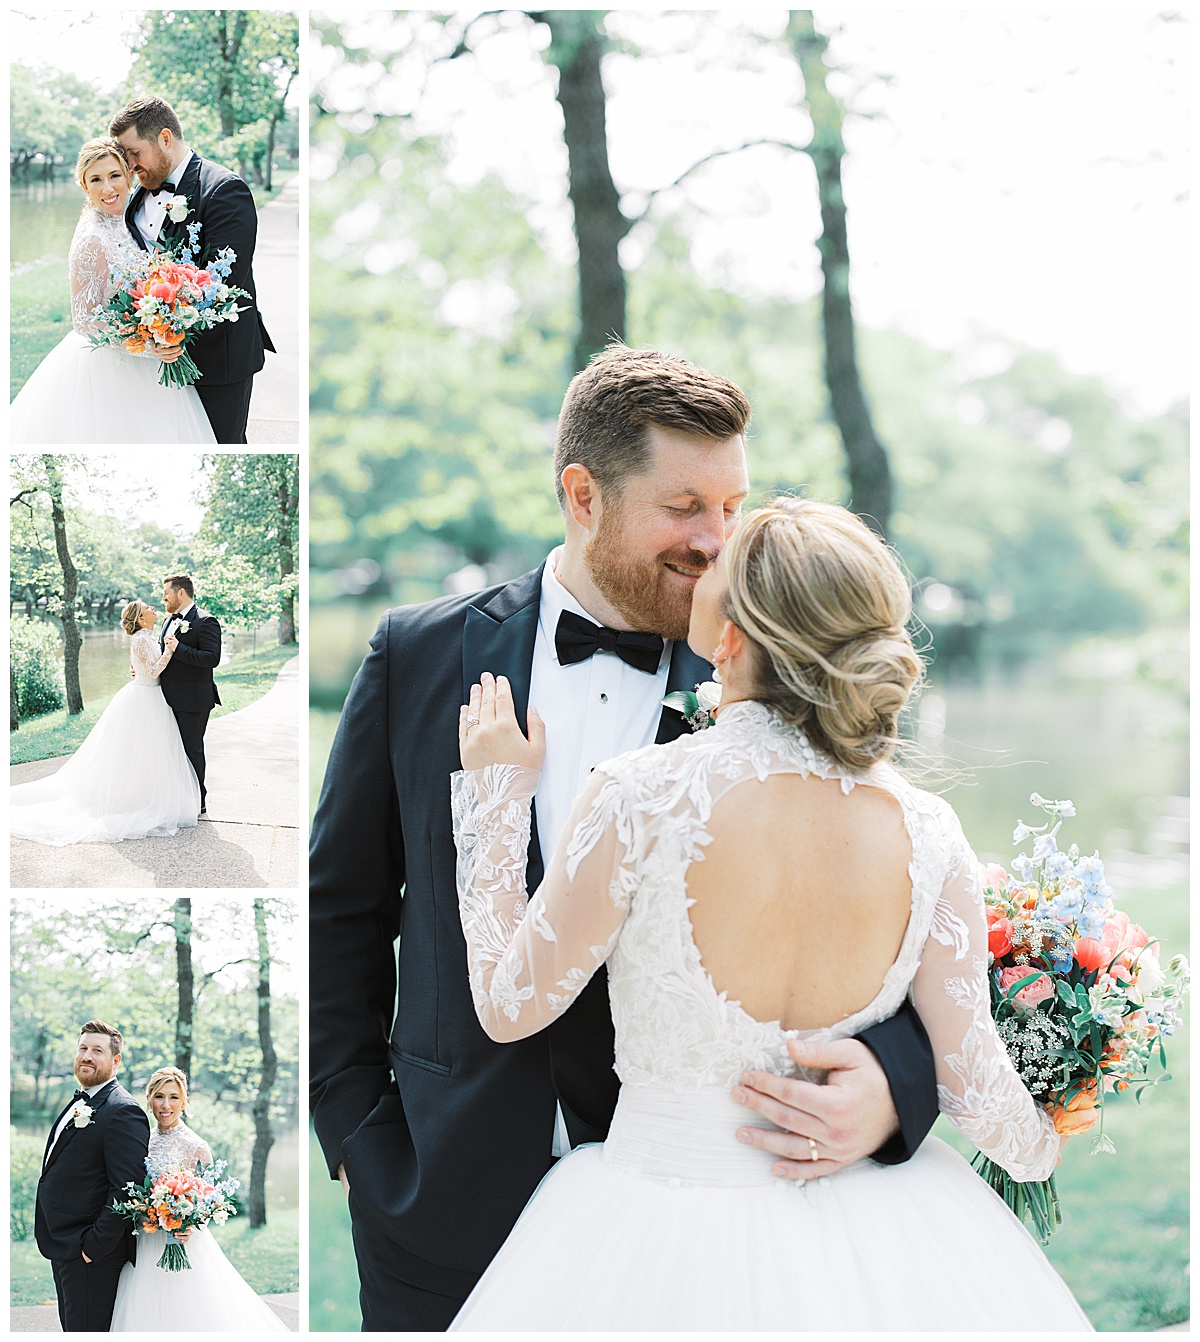 Bride with low bun hairdo and groom in black tuxedo surrounded by a lake.